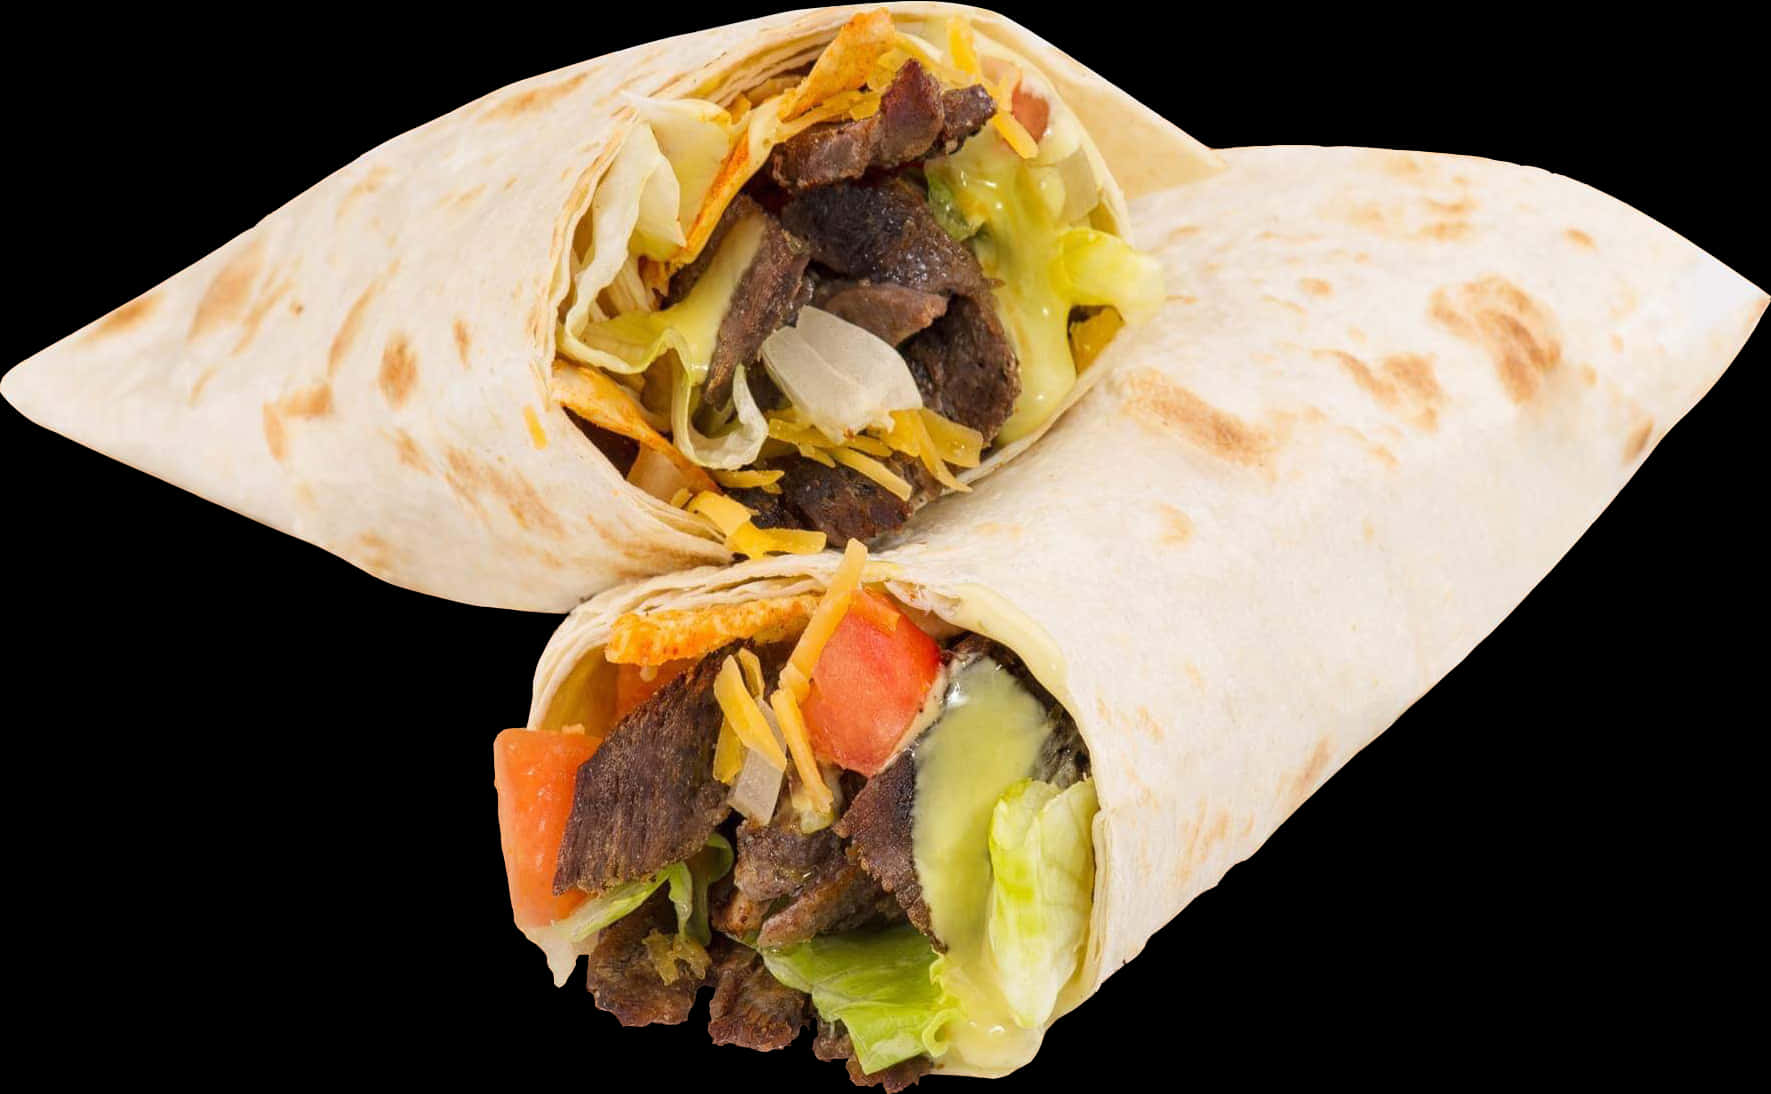 A Burrito With Meat And Vegetables